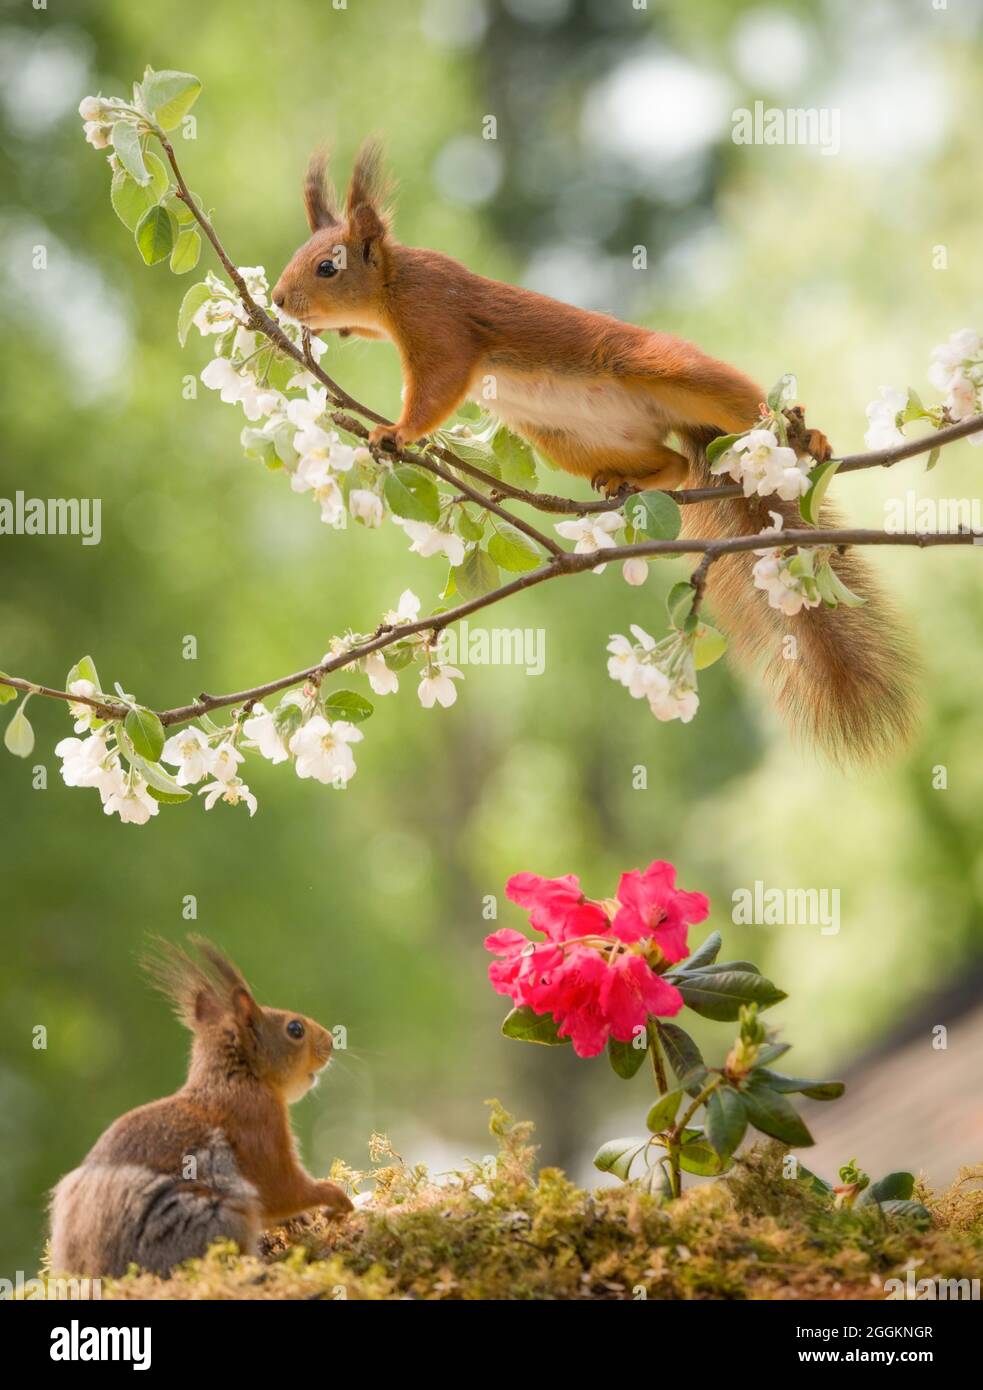 red squirrels with an apple flower branch Stock Photo